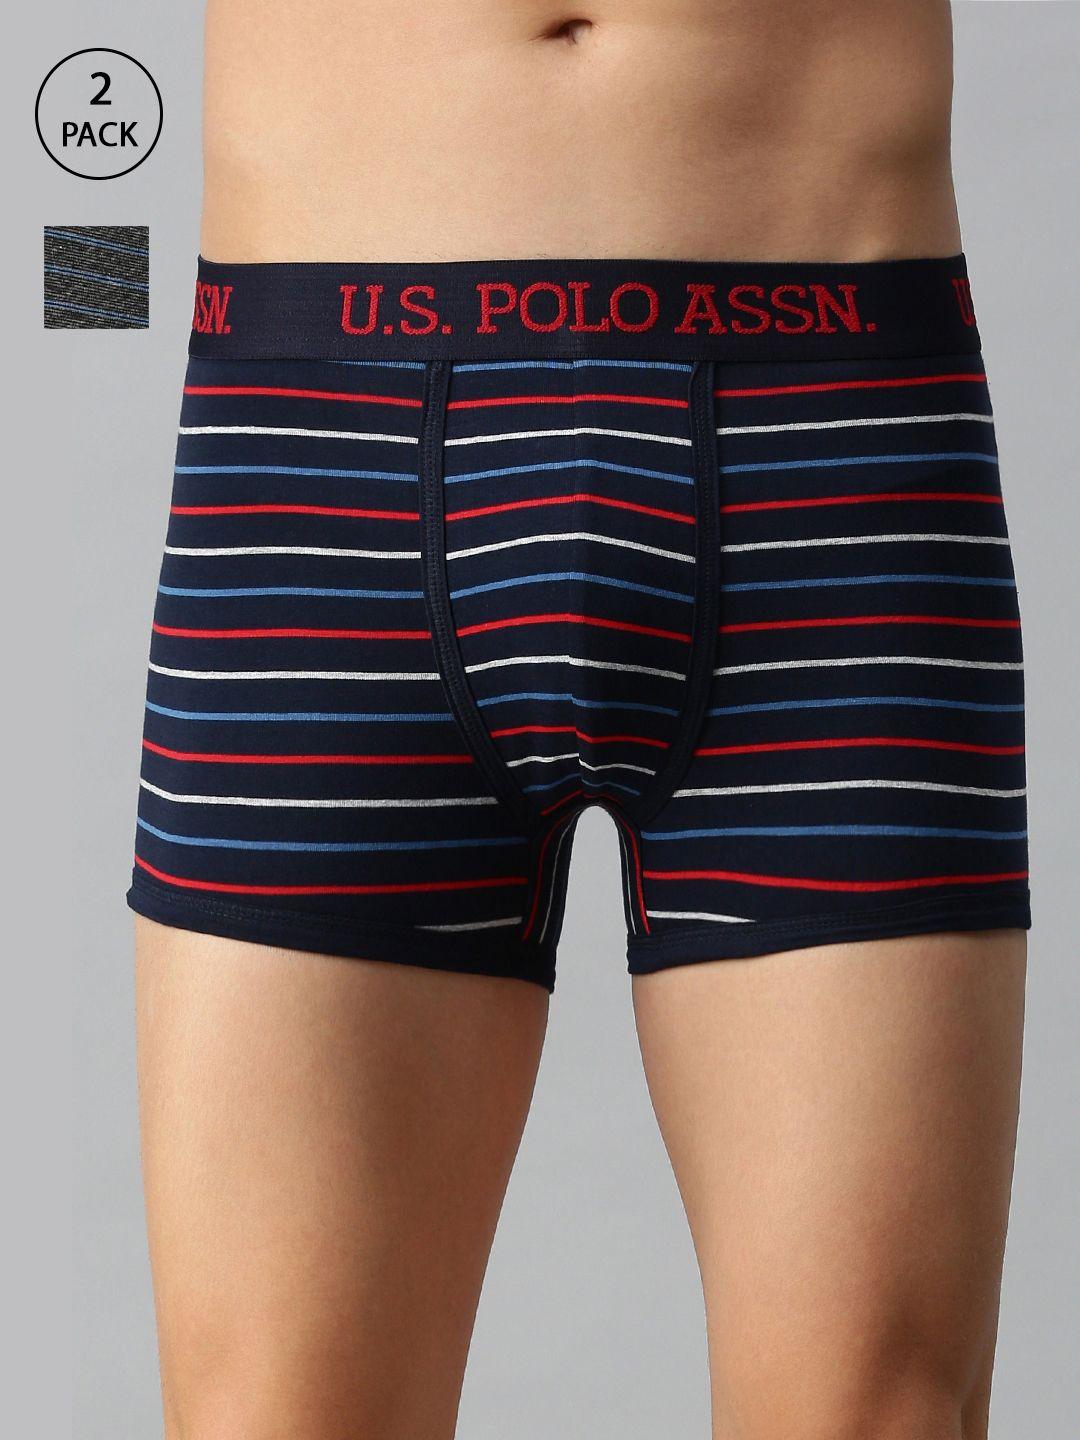 u.s. polo assn. men pack of 2 assorted striped trunks i004-br0-p2